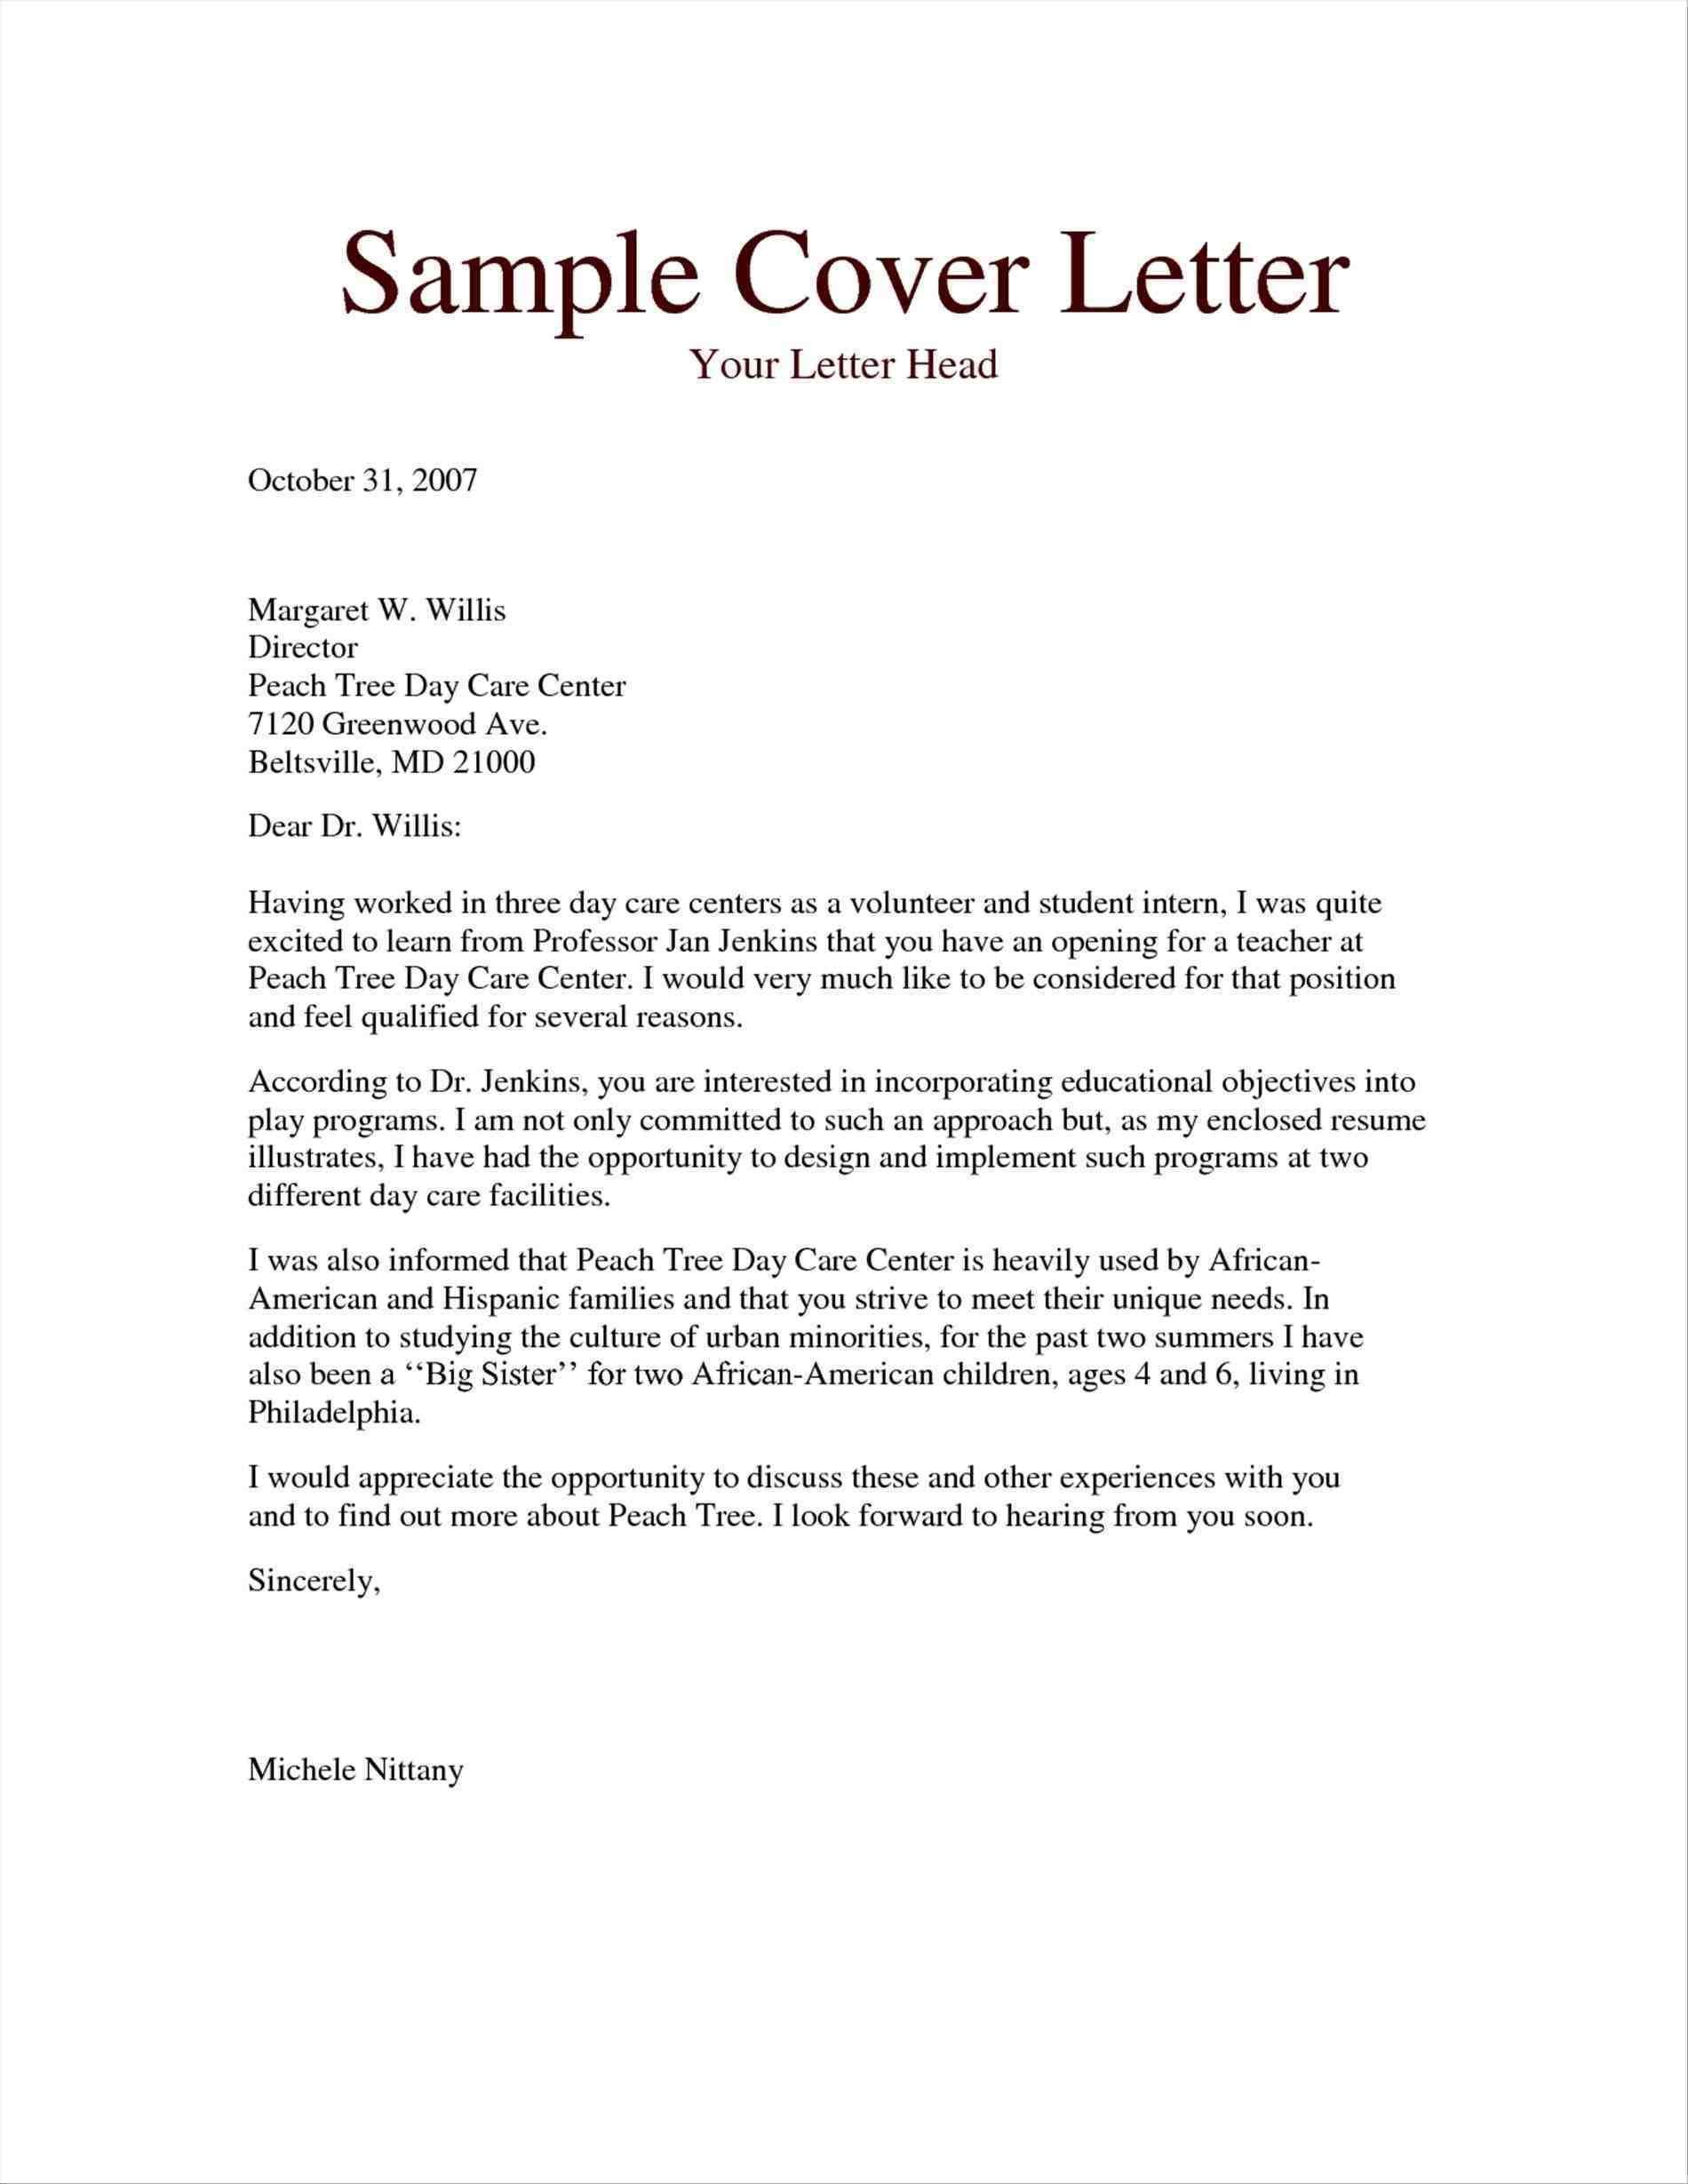 30+ How Long Should A Cover Letter Be Cover letter for resume, Cover